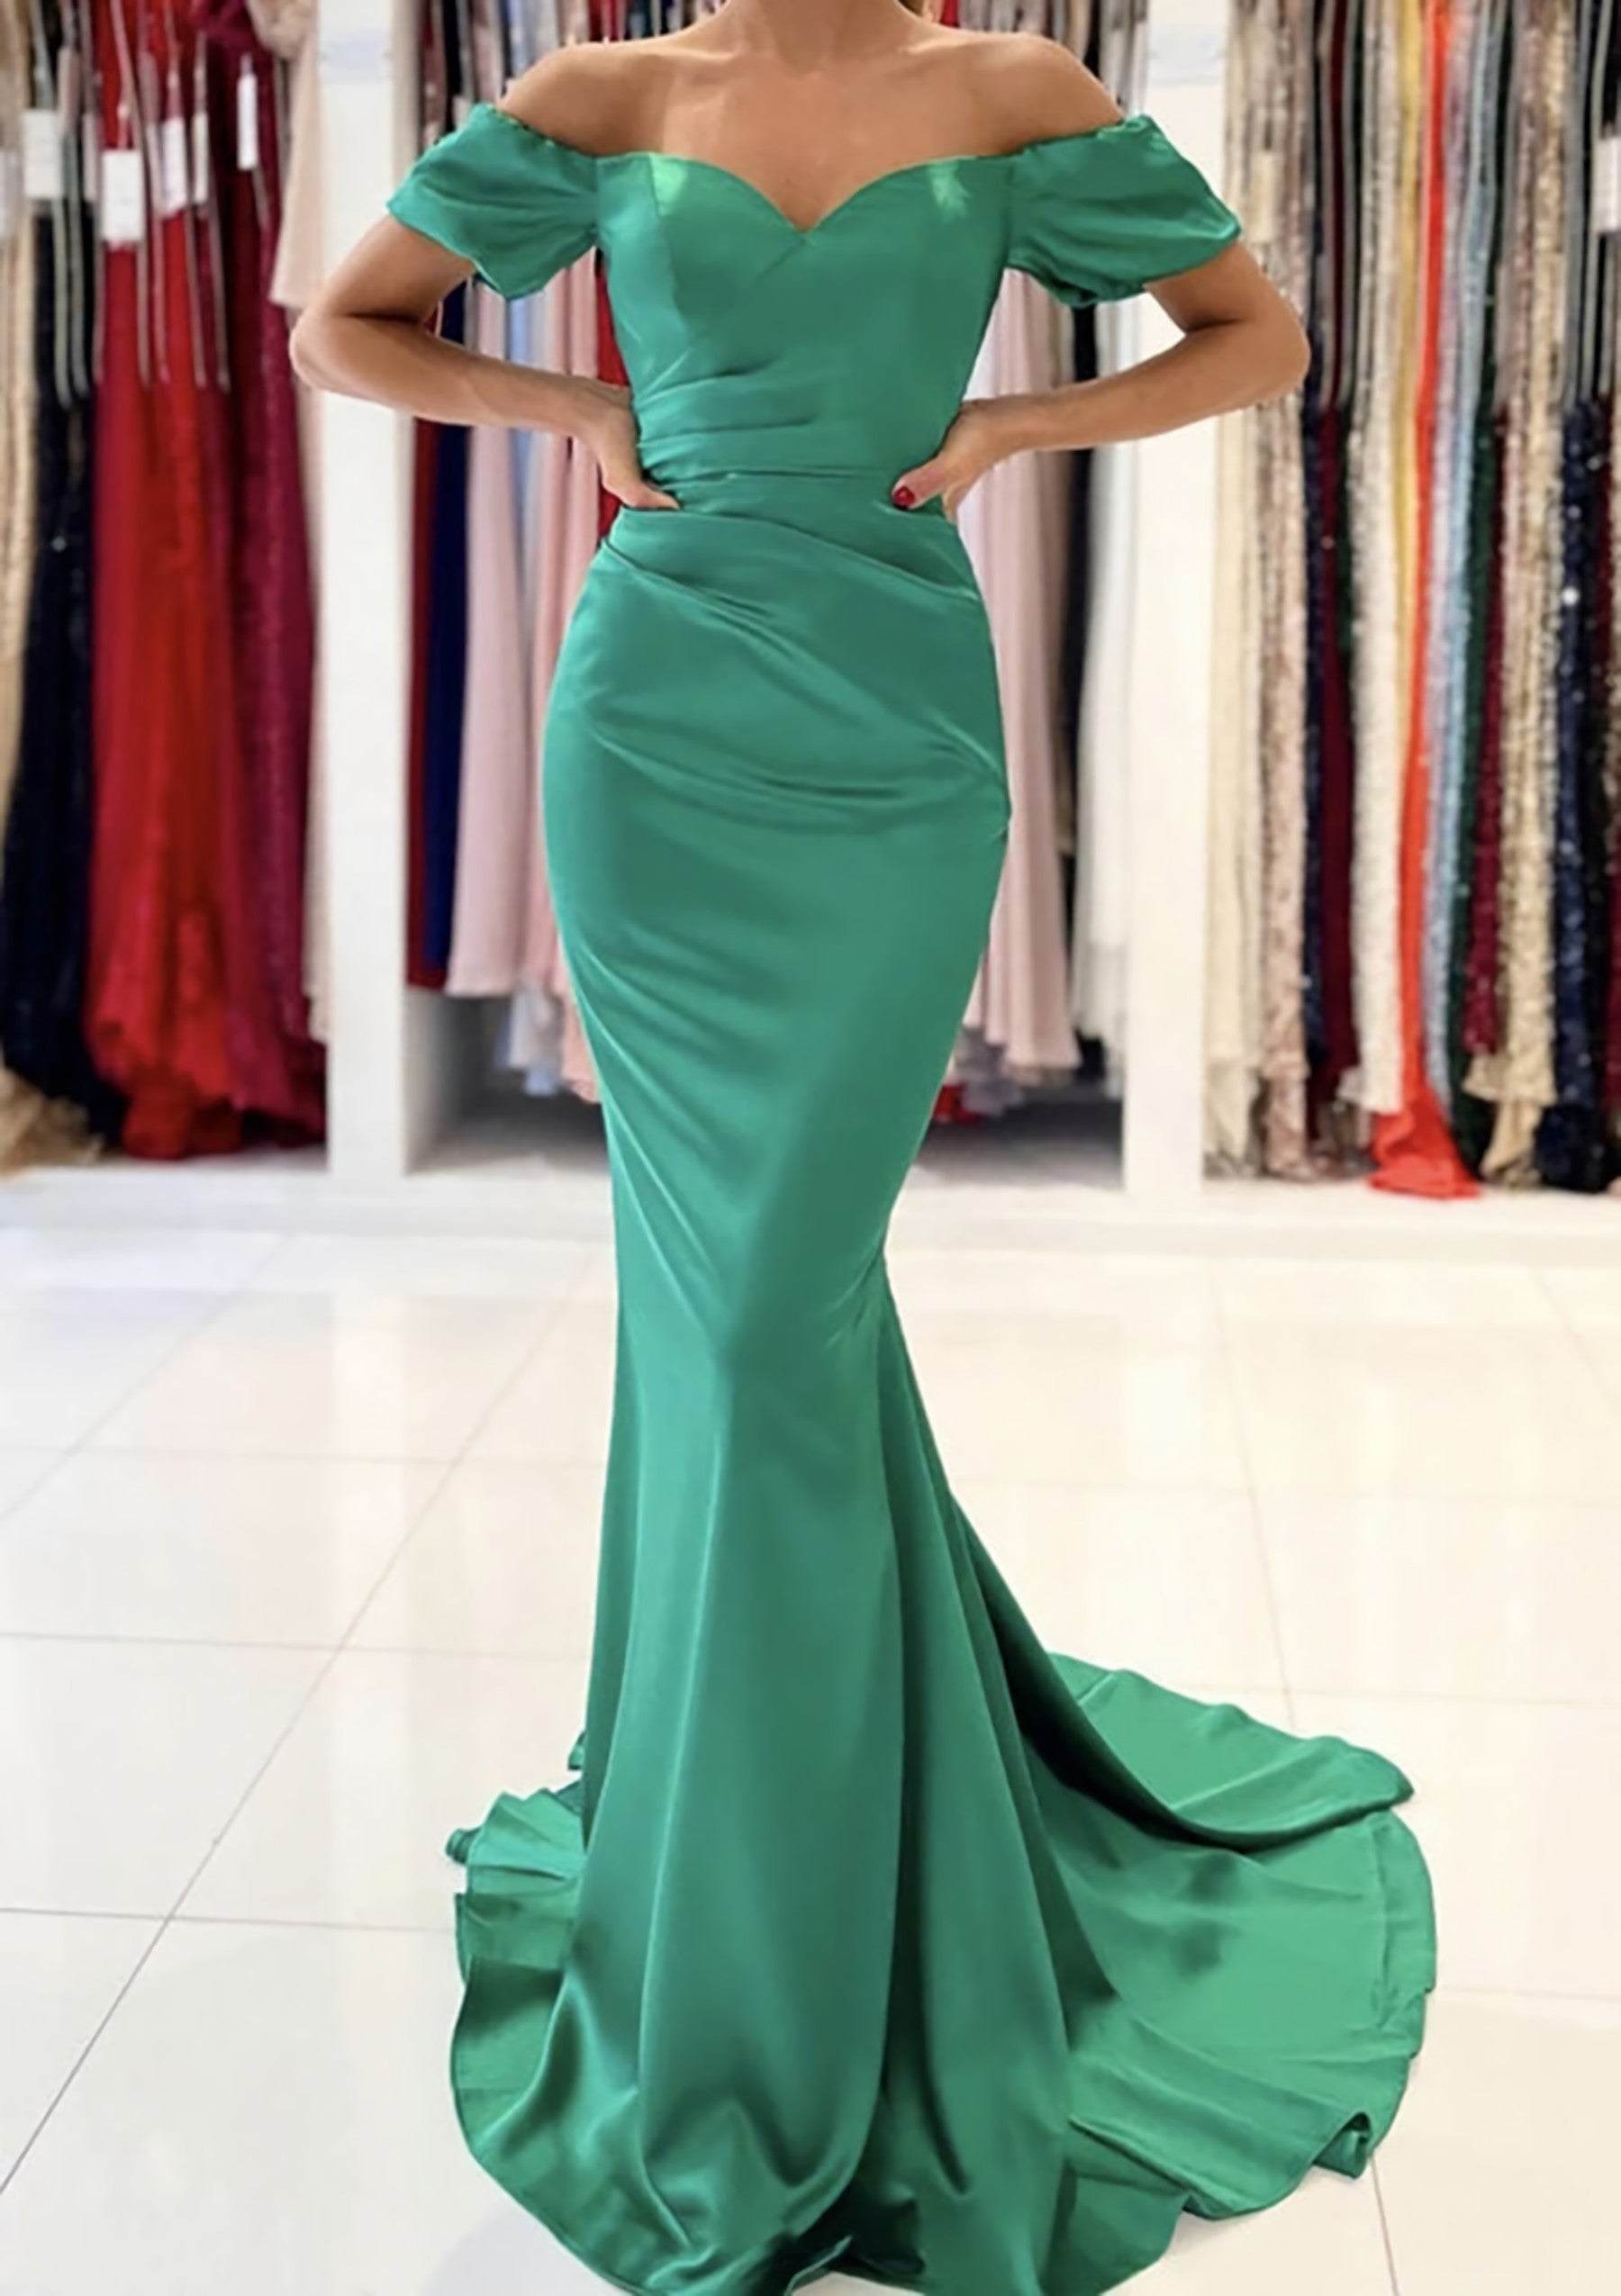 Trumpet/Mermaid Off-the-Shoulder Short Sleeve Satin Sweep Train Corset Prom Dress With Pleated Gowns, Prom Dress Colorful